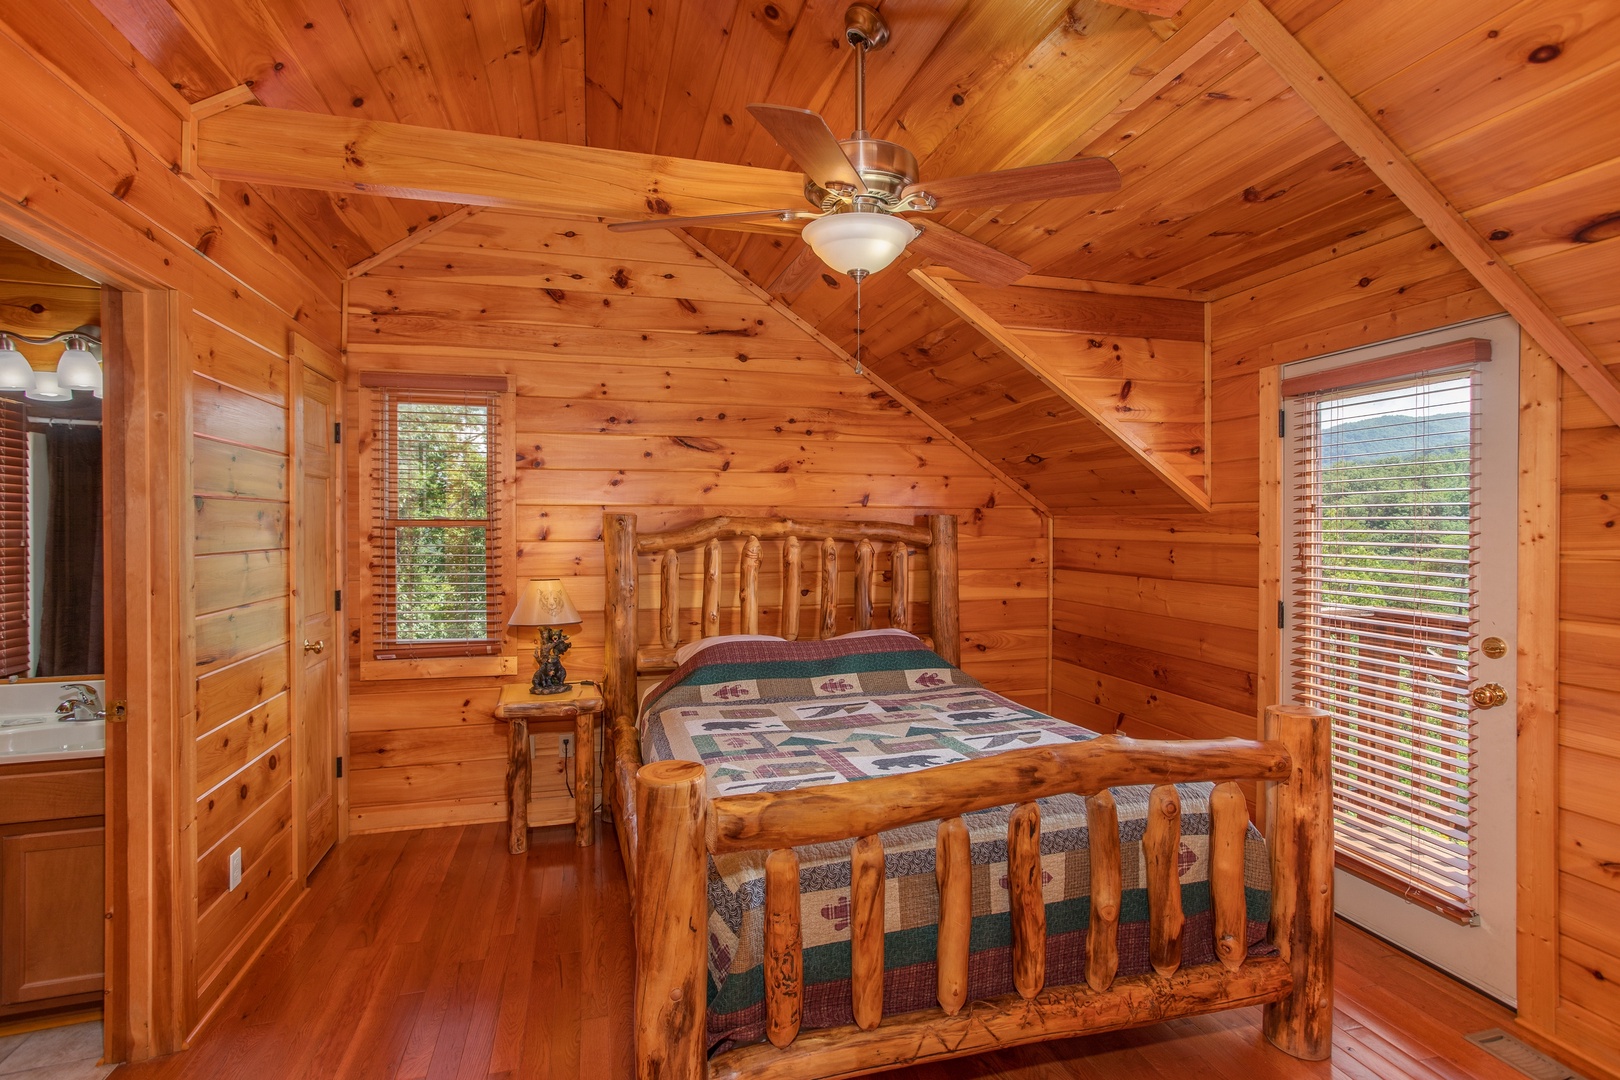 Queen-sized log bed in a bedroom with deck access at Four Seasons Lodge, a 3-bedroom cabin rental located in Pigeon Forge